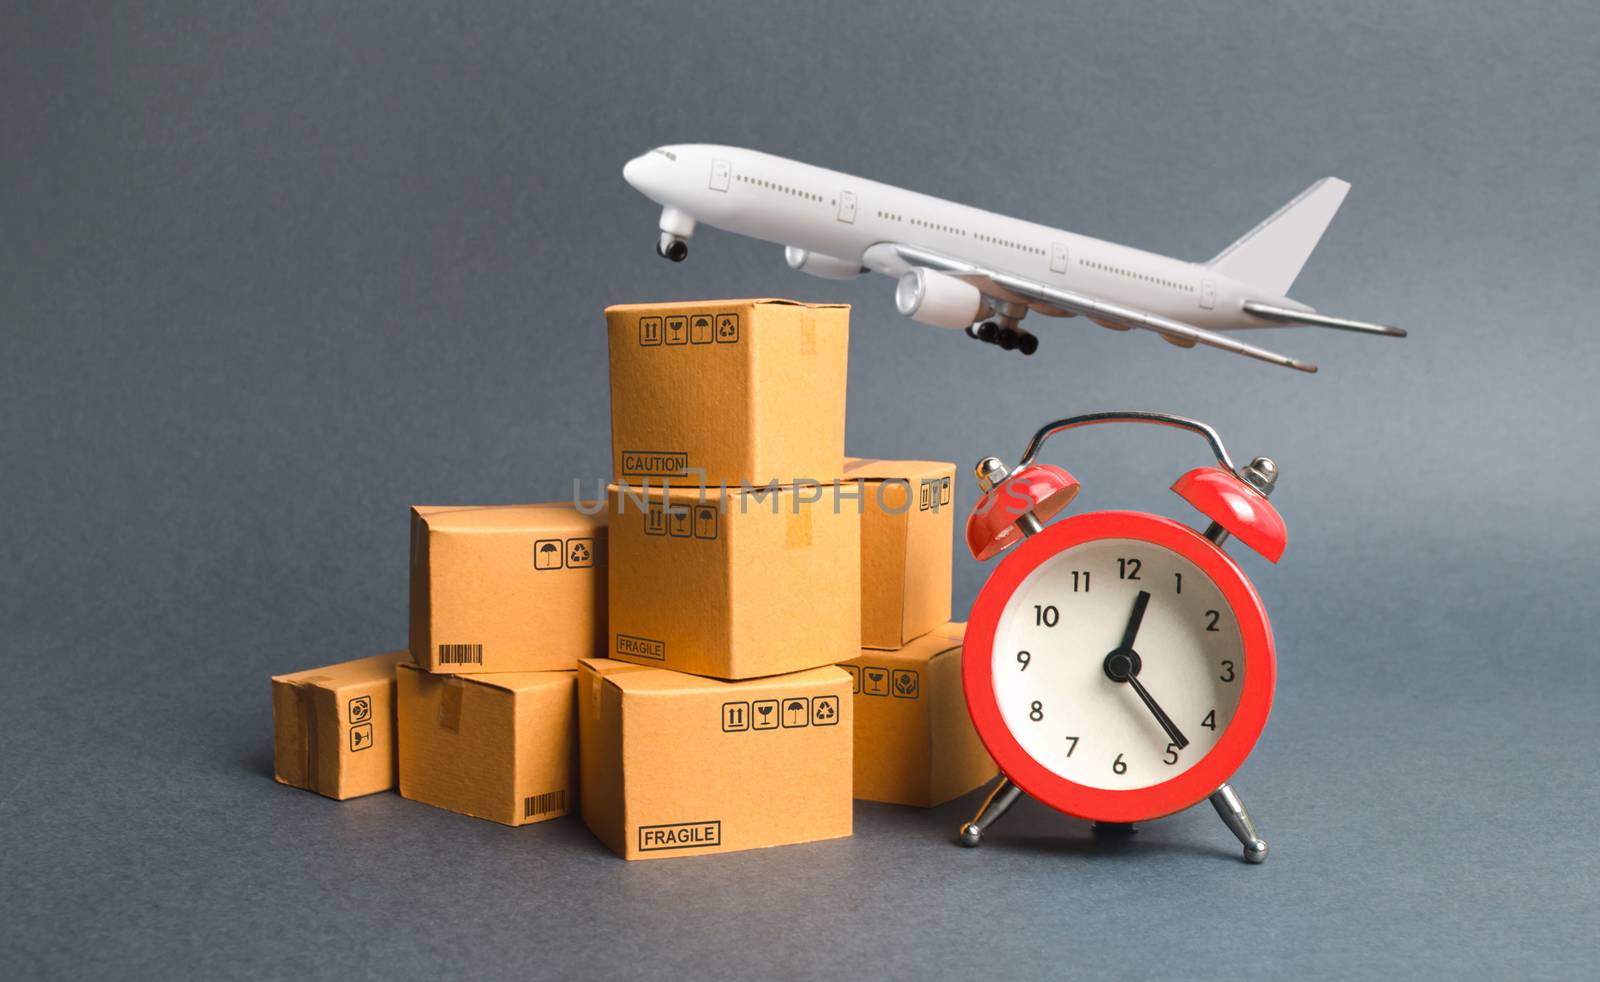 Cargo plane, stack of cardboard boxes and a red alarm clock. Express air delivery concept. Temporary storage, limited offer and discount. Optimization of logistics, improving efficiency by iLixe48